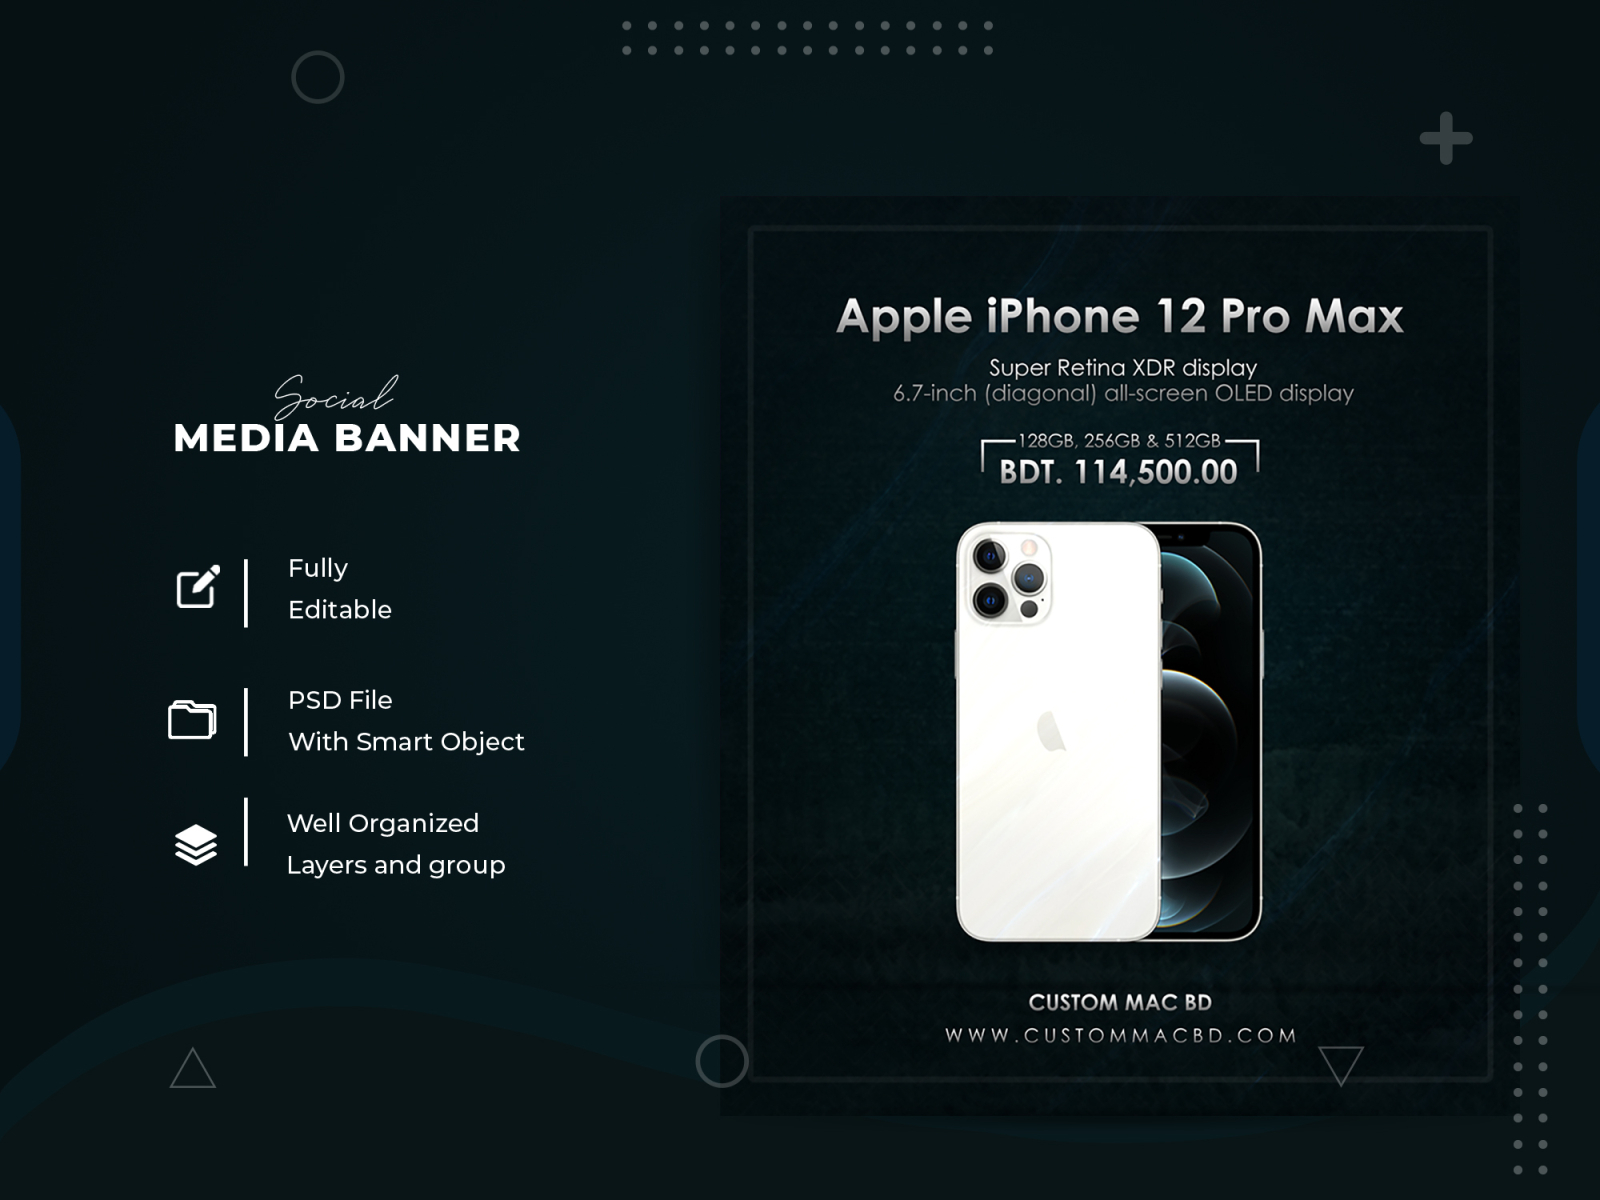 Apple Iphone 12 Pro Max Mobile Phone Ads By Saiyem Arfat On Dribbble